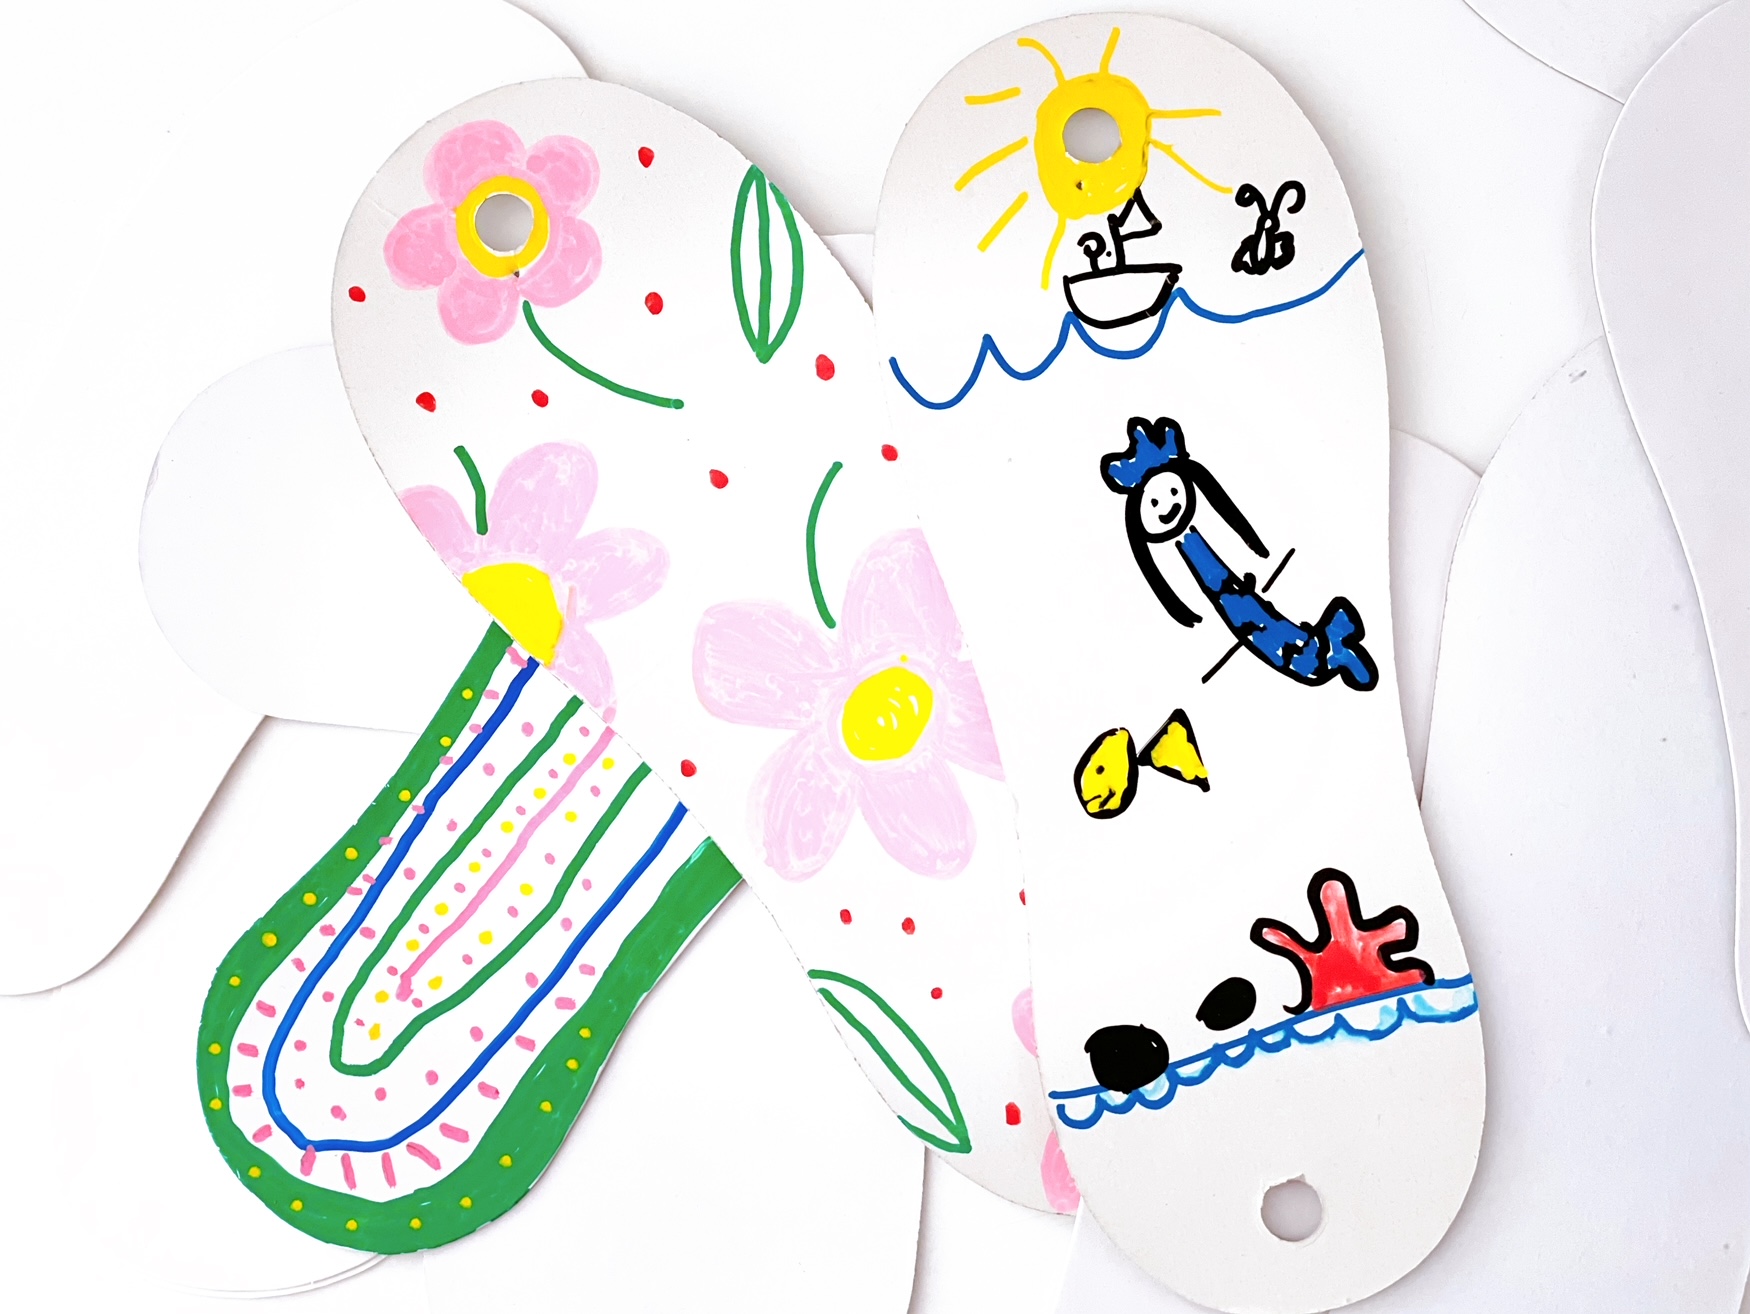 Cardboard feet from sox packaging is decorated with colorful designs using markers. They make great wall art.